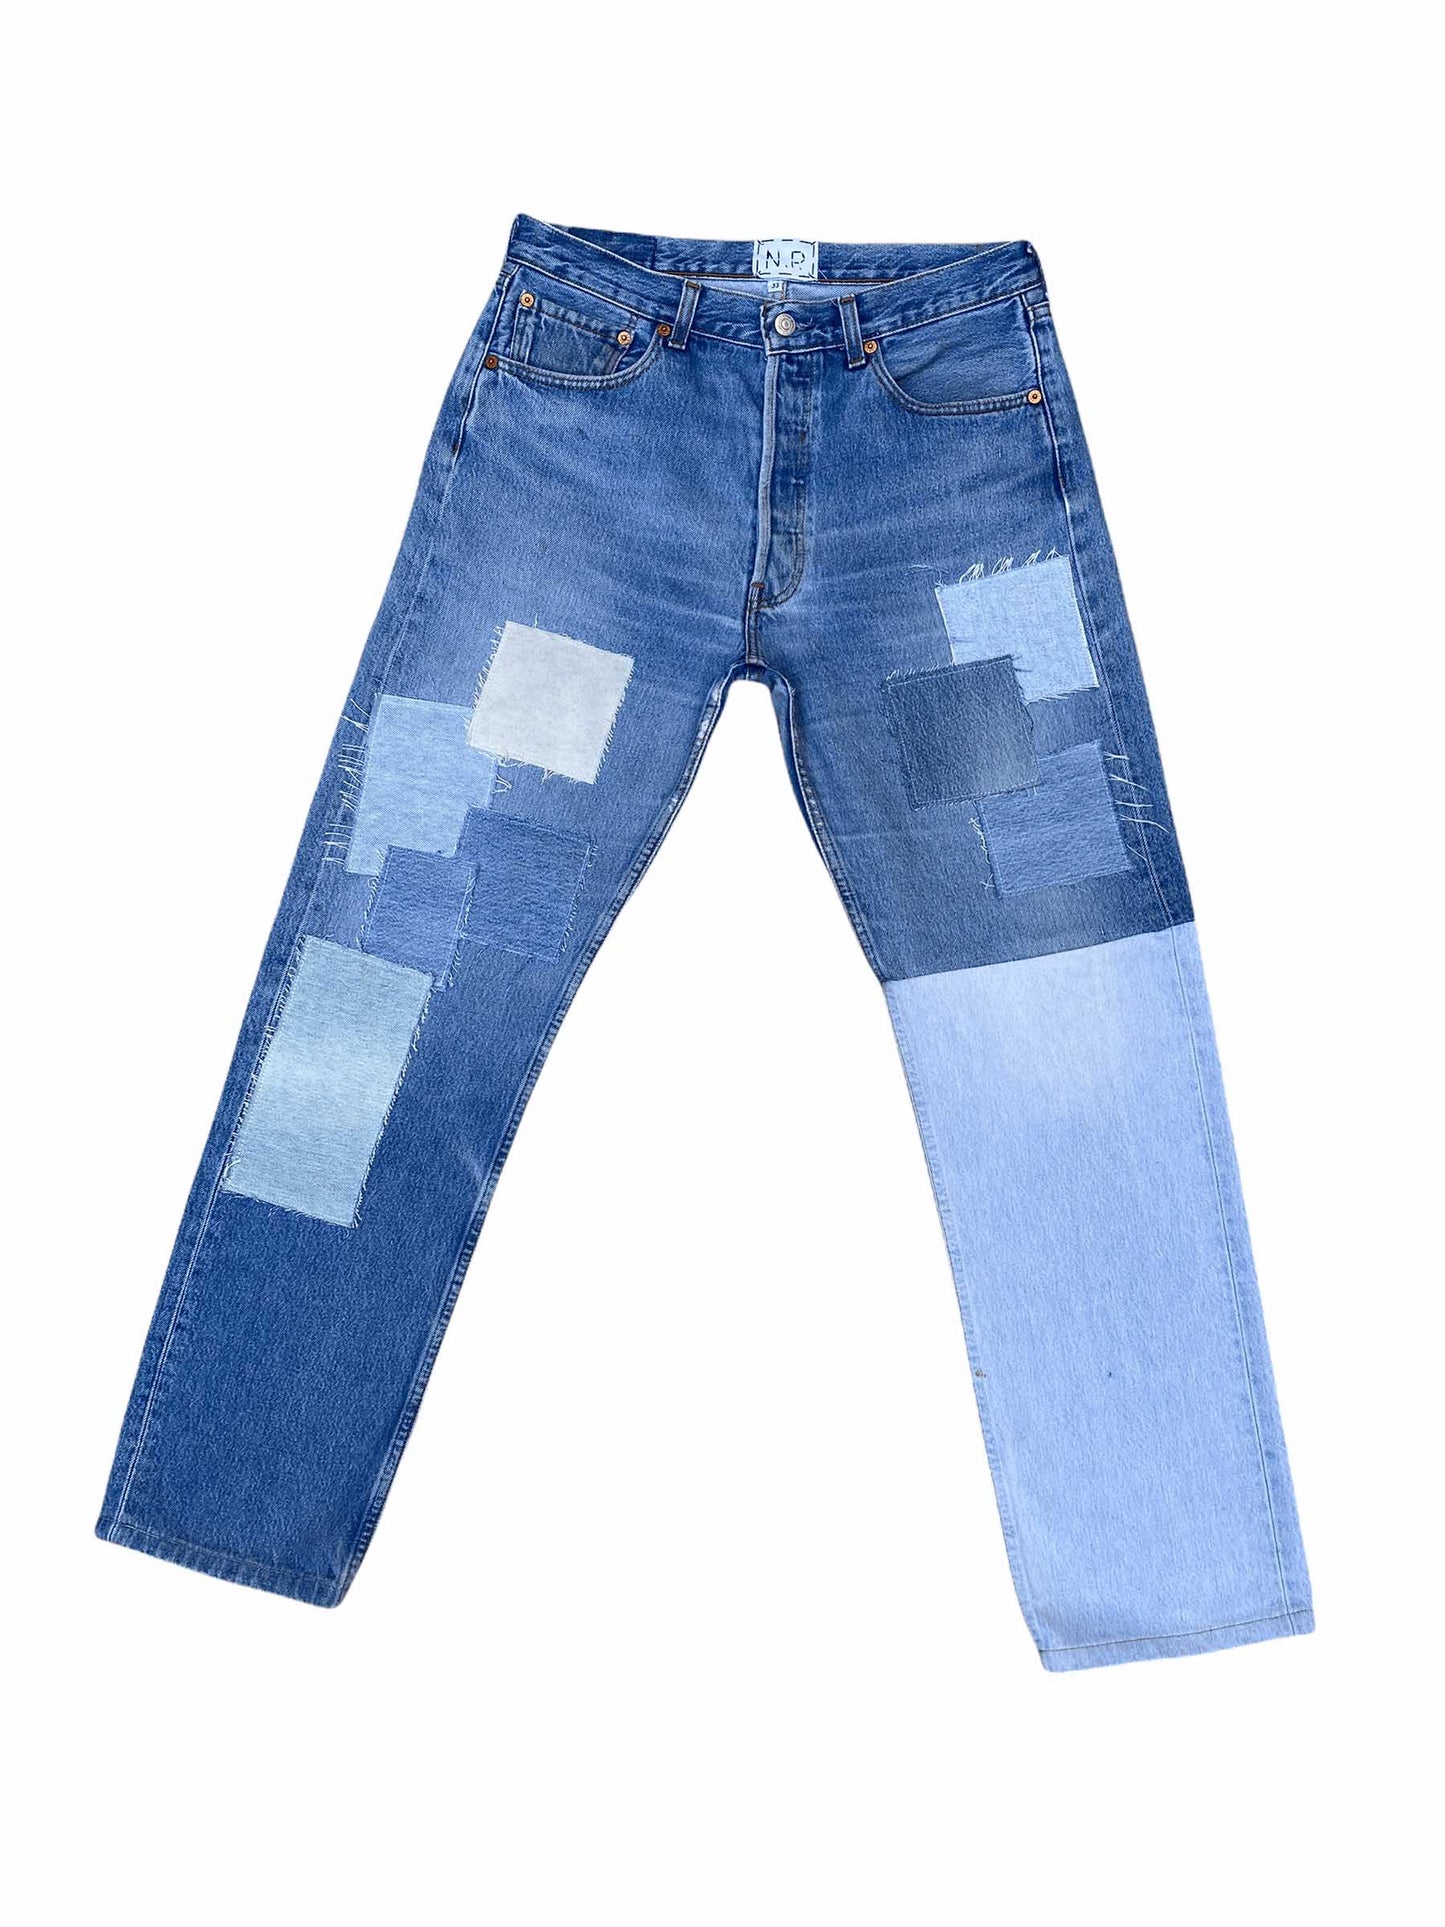 SEMI-PATCHED JEANS V1